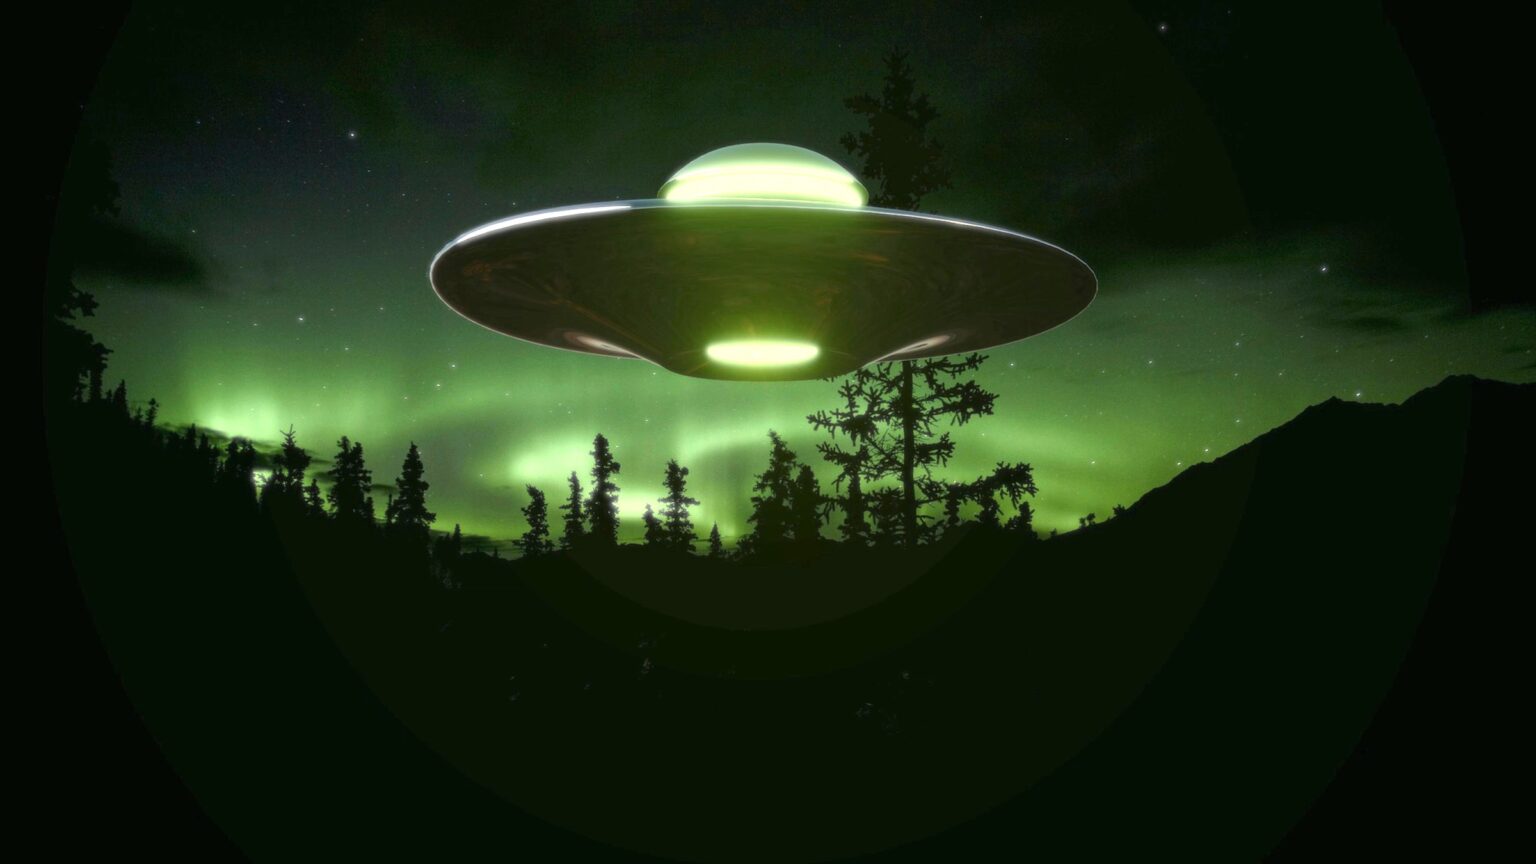 A strange nighttime sighting led to come Canadian citizens to snap pics of what they think might be aliens. What do you think?